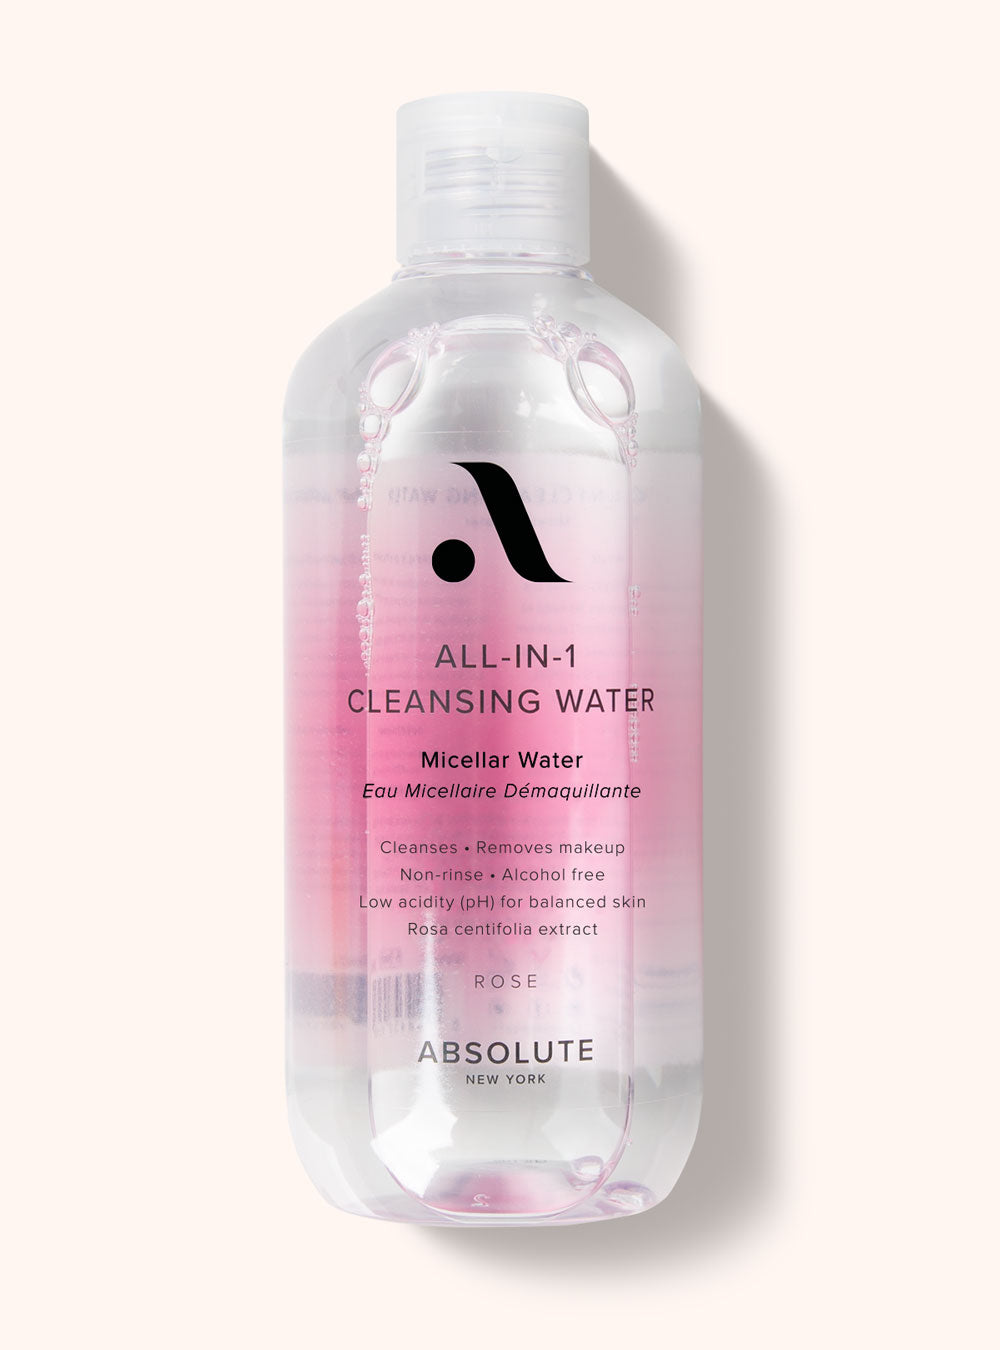 All-in-1 Cleansing Water || Rose